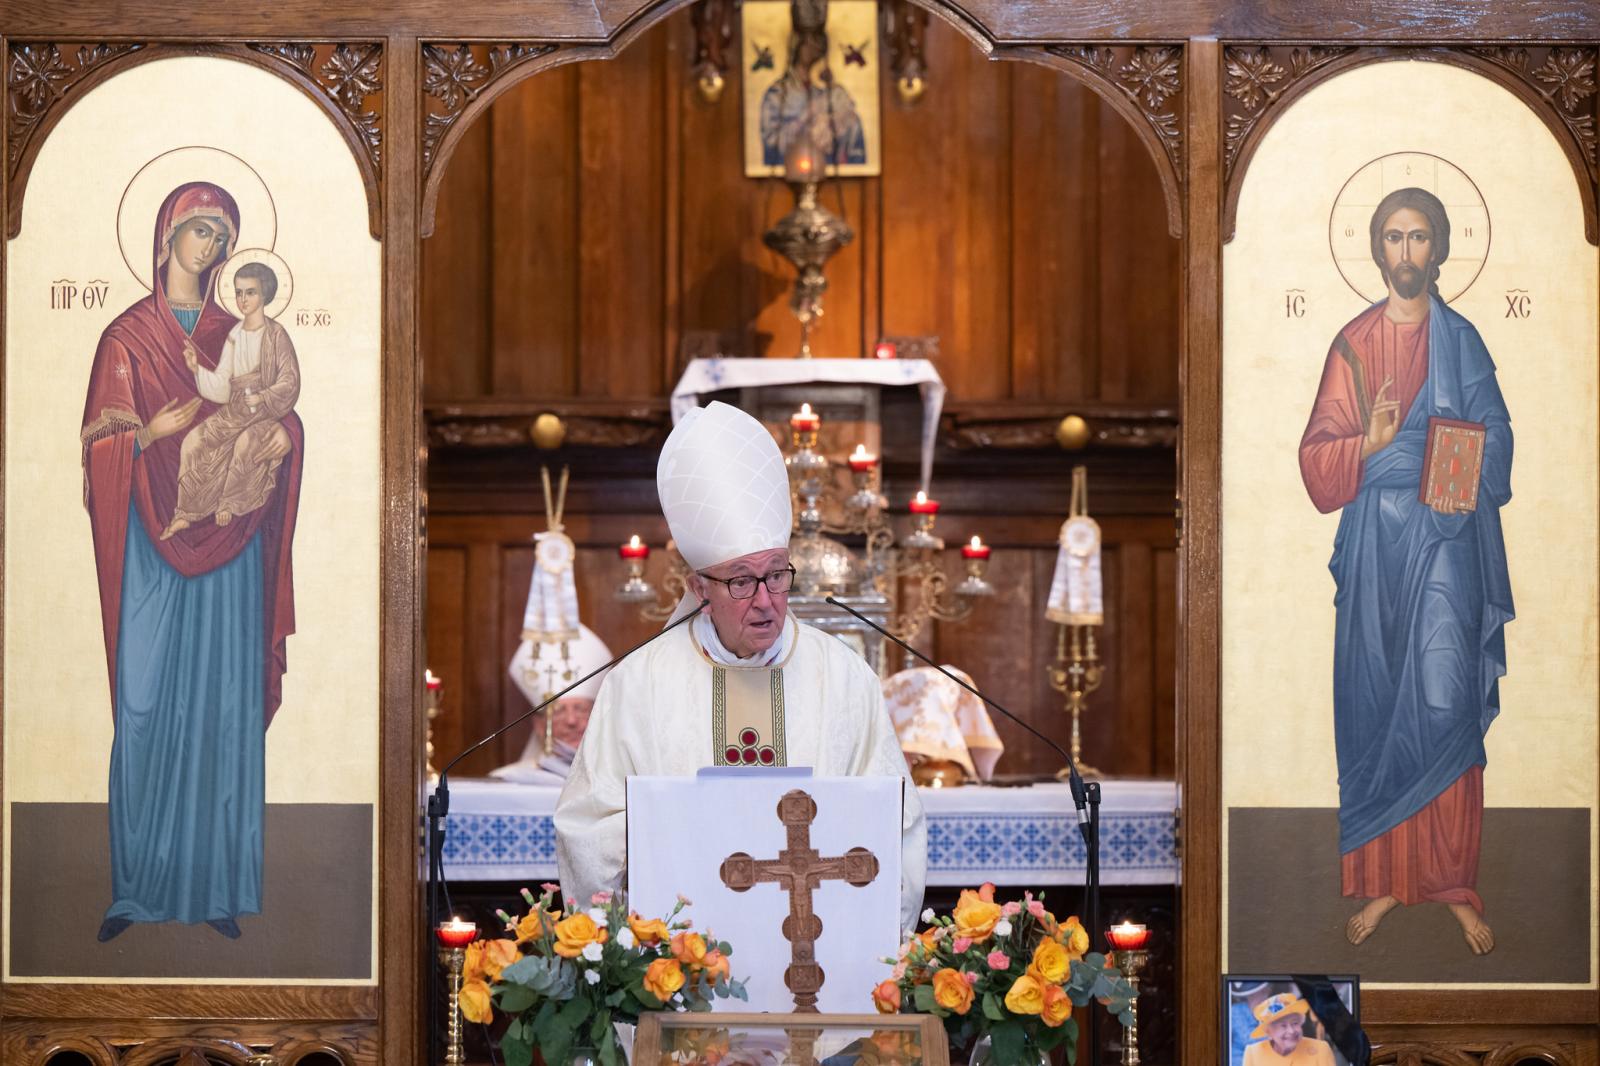 Cardinal's homily on the Day of Prayer for Ukraine in the Year of the Cross - Diocese of Westminster